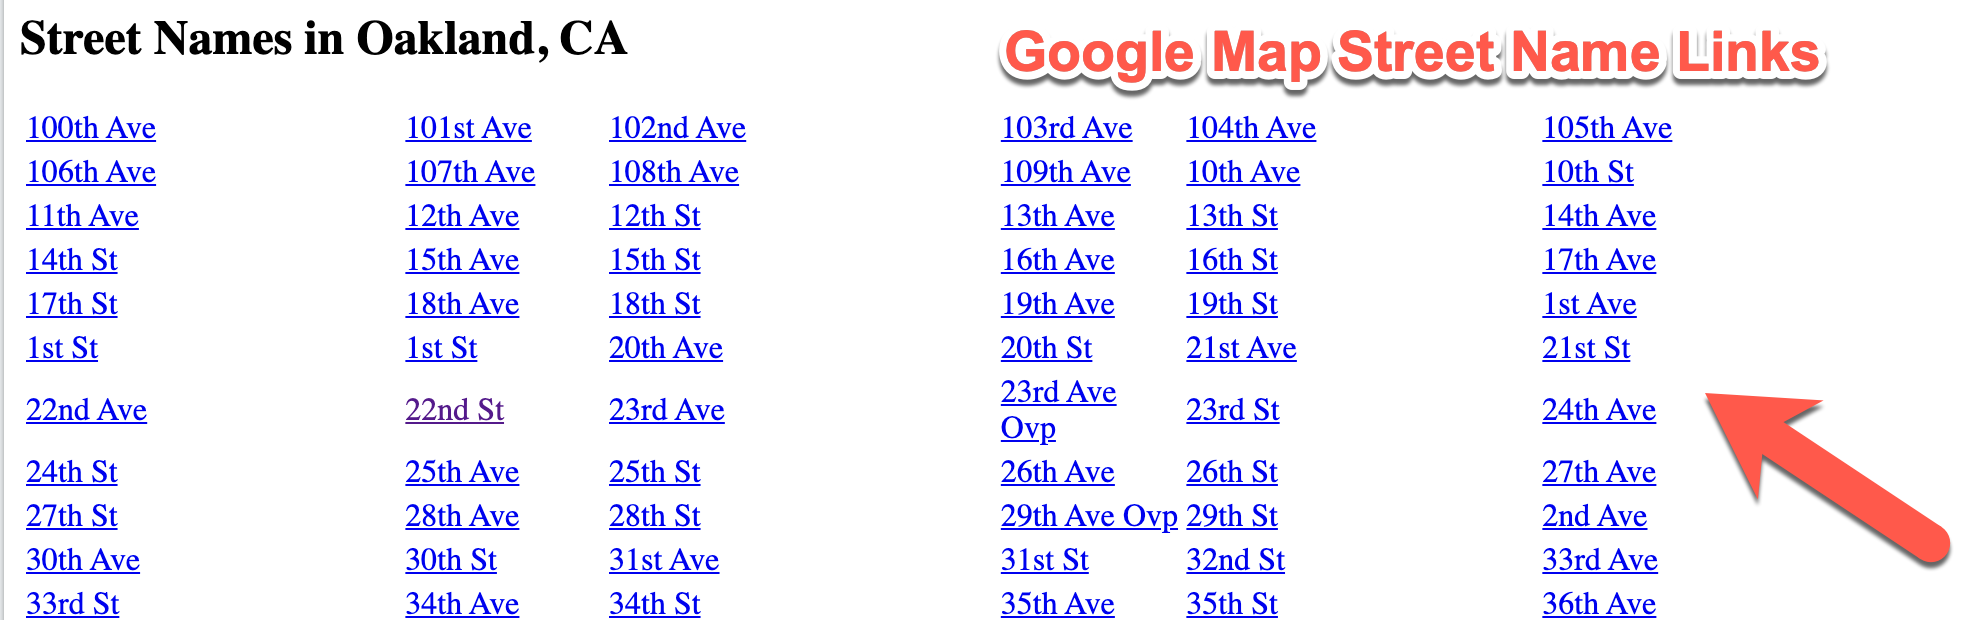 Google Things to do - Street Name Links.png